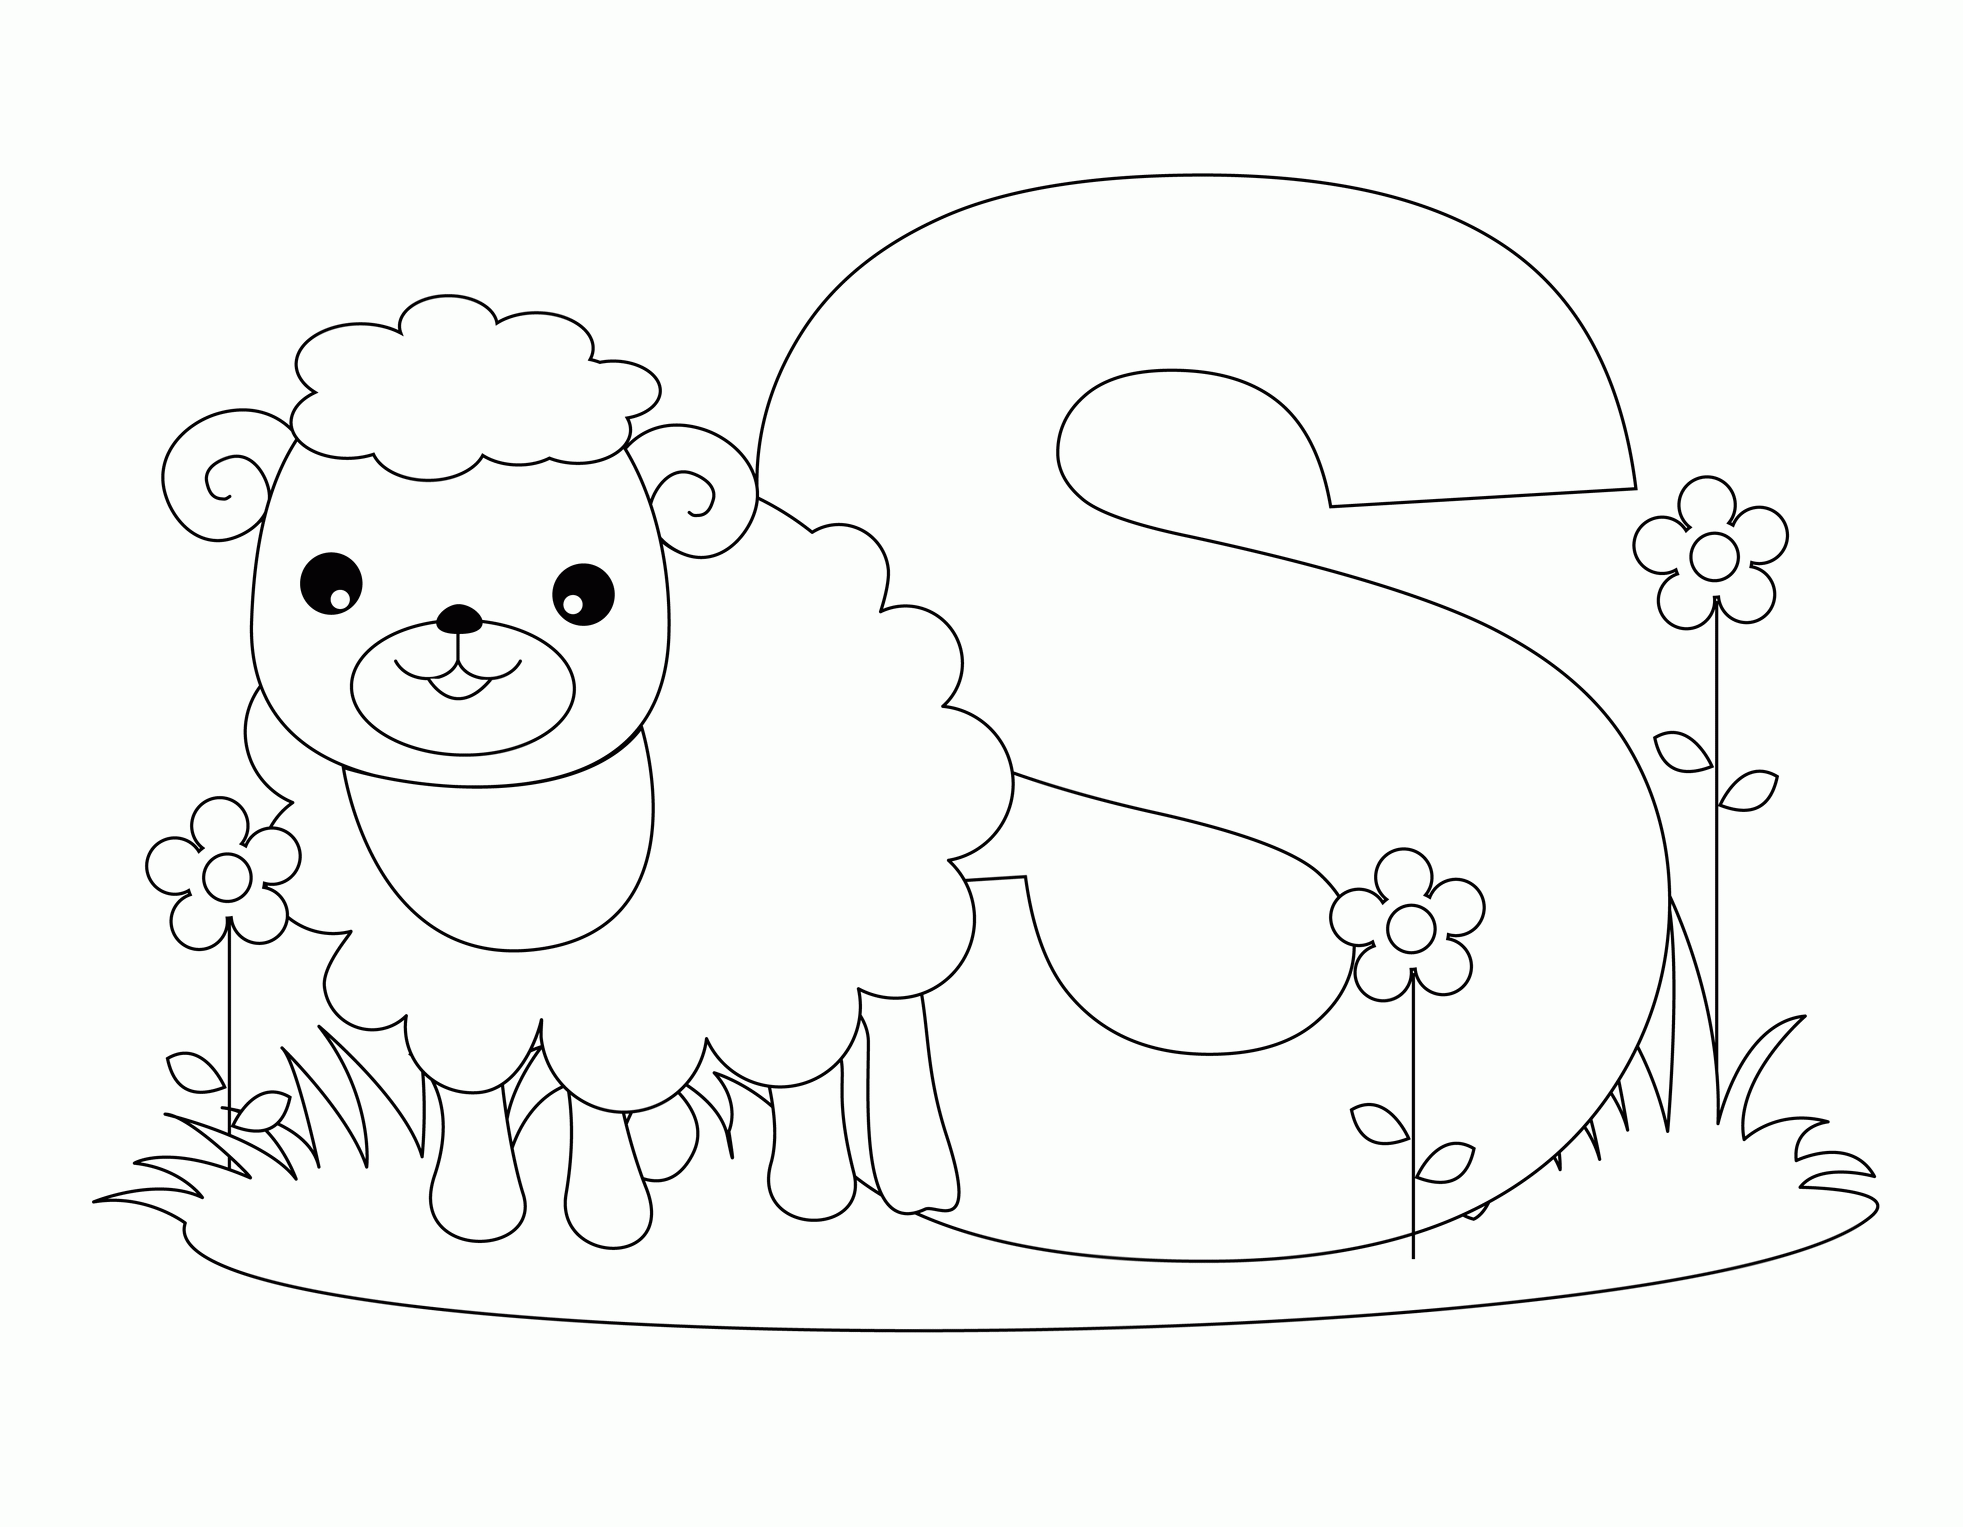 free printable abc coloring pages s is for sheep - VoteForVerde.com